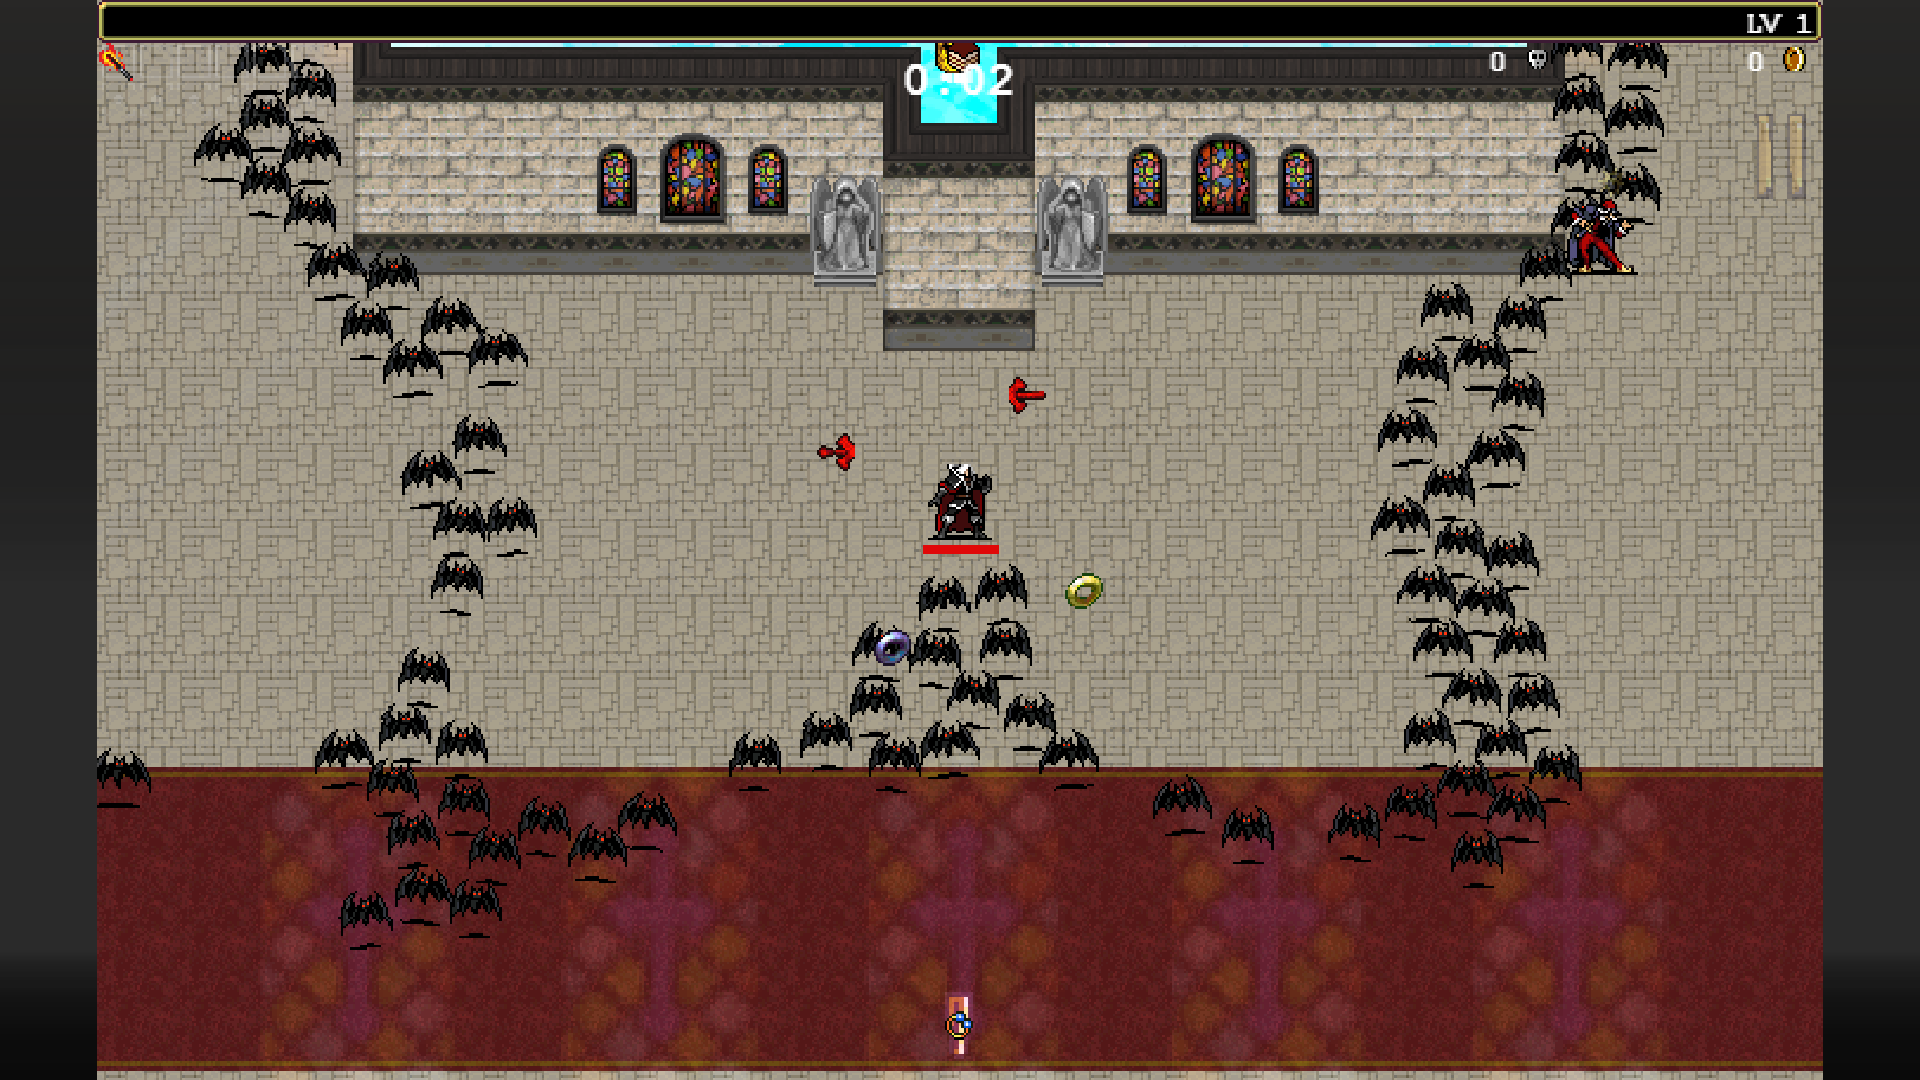 A hero stands among a group of bats in Vampire Survivors